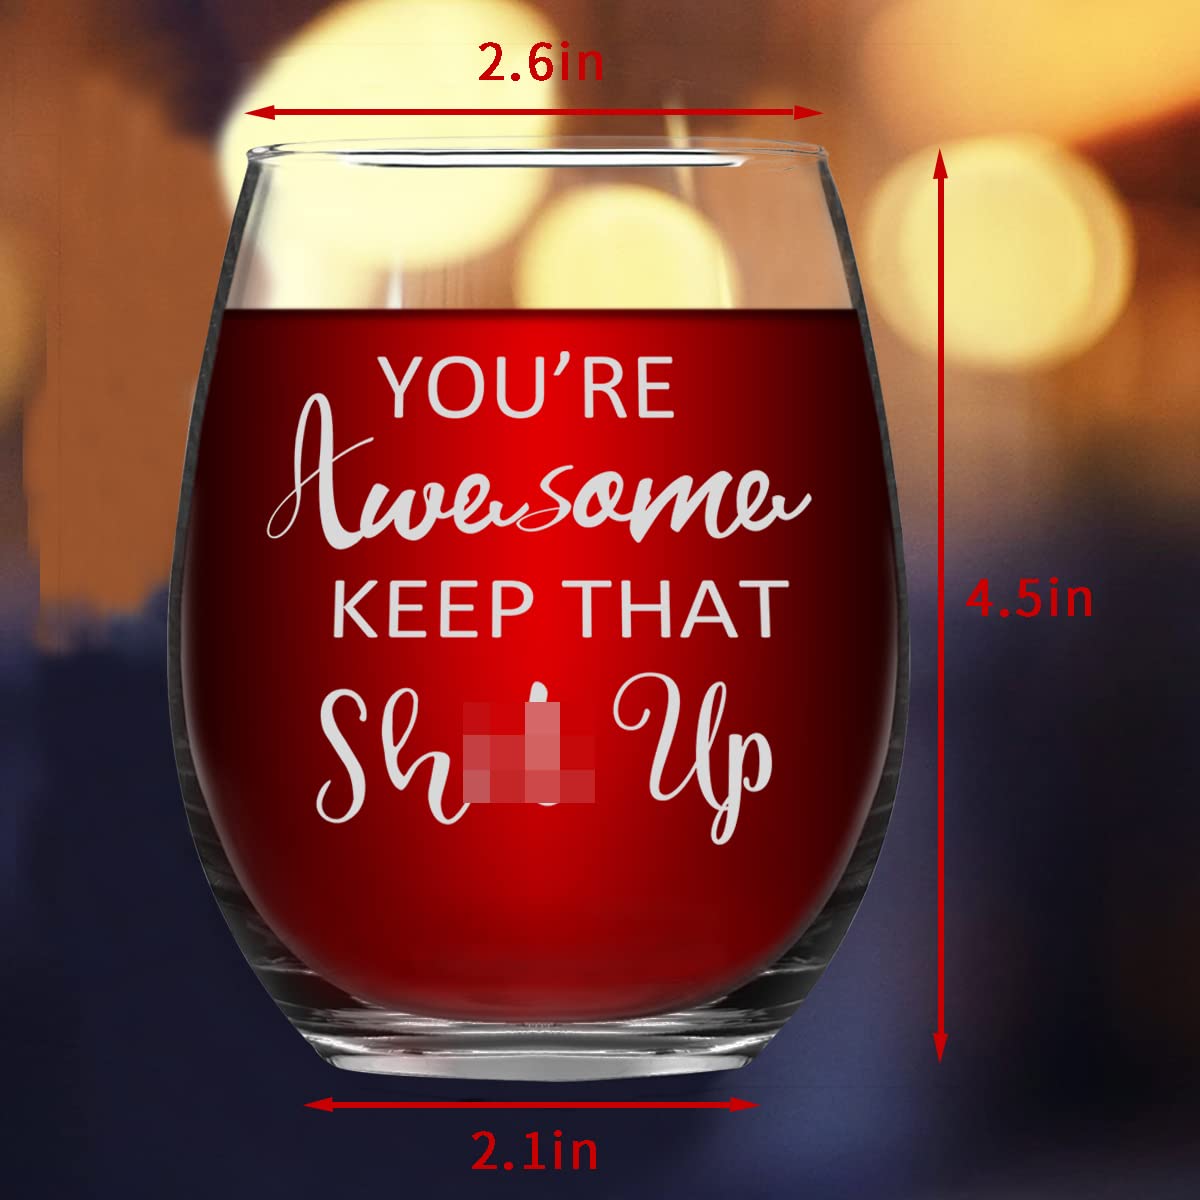 You're Awesome Keep That up Wine Glasses Set of 2, Funny Thank You Wine Glass Gift for Women Men, Novelty Inspirational Gift Idea for Friends Coworkers Sisters, Birthday Christmas Retirement Gift 15Oz